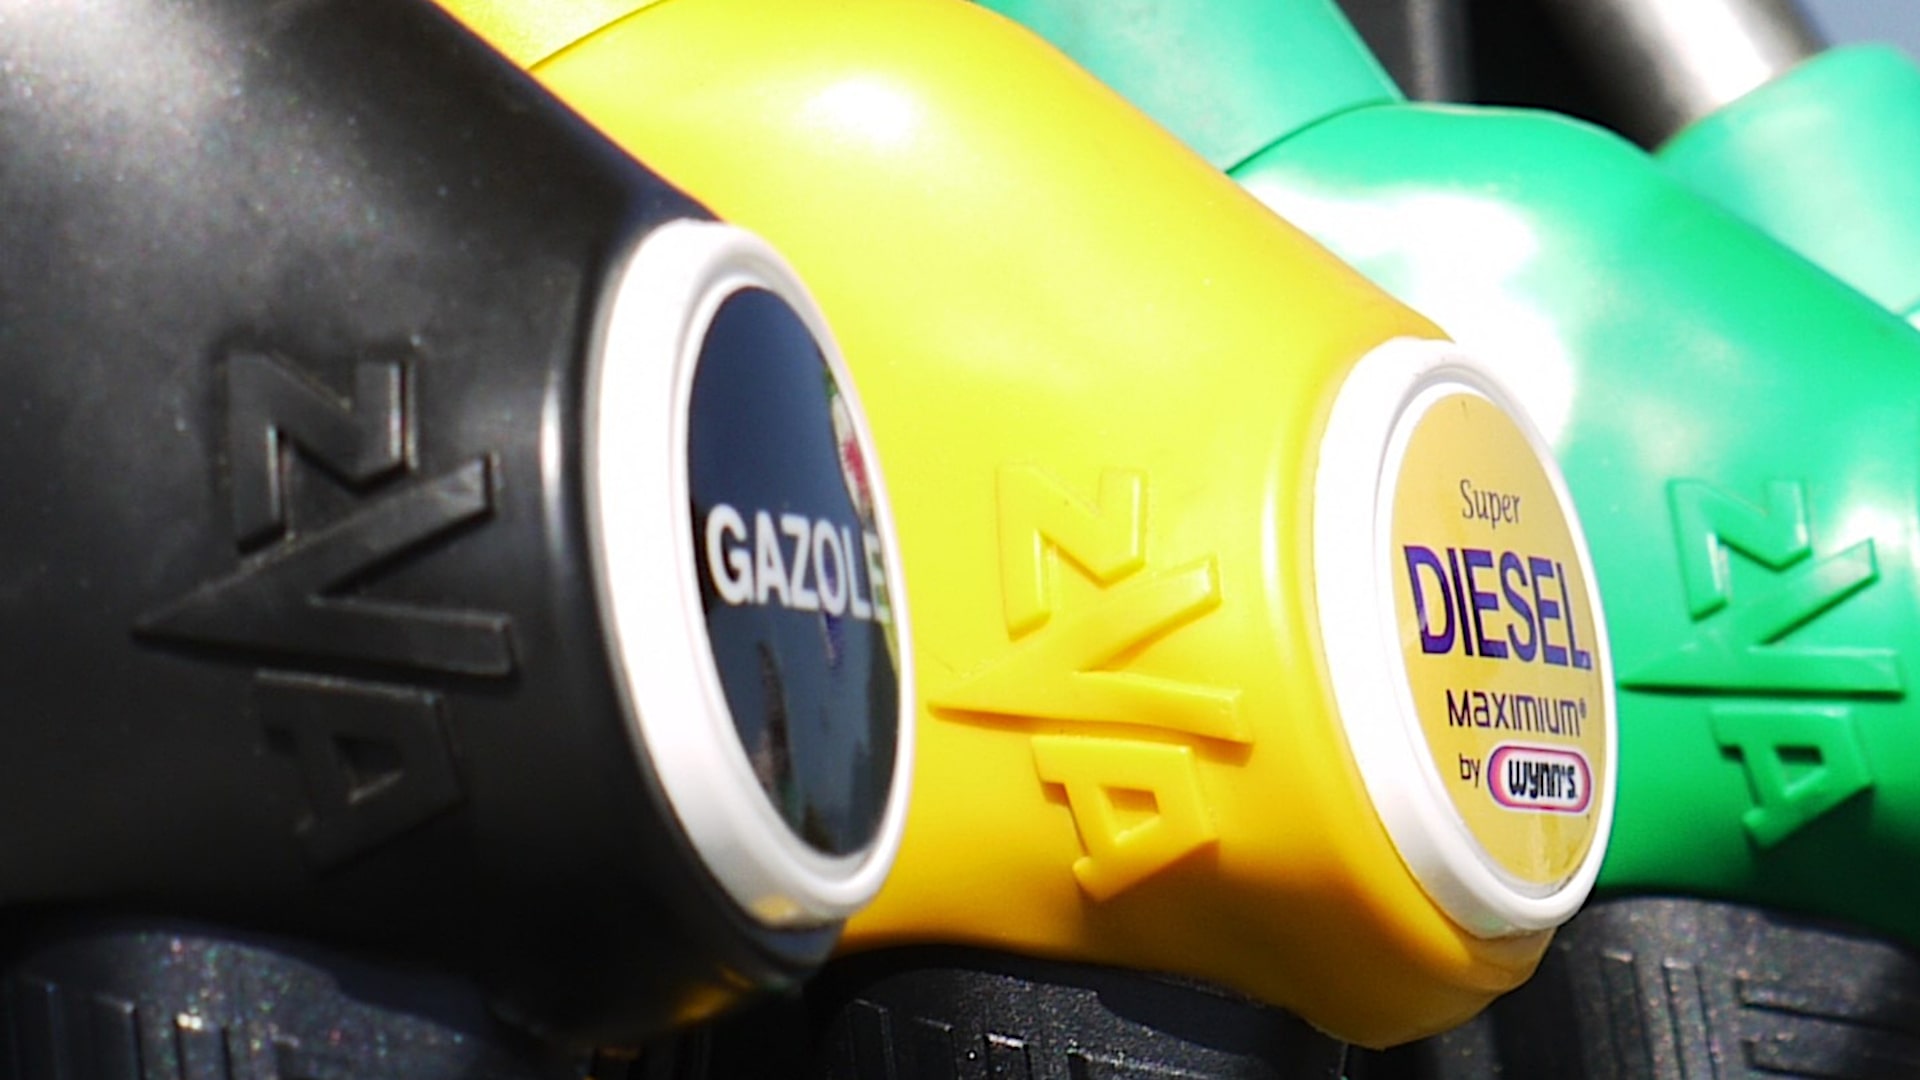 You are currently viewing Diesel or Gasoline – The Eternal Dilemma When Buying a Car